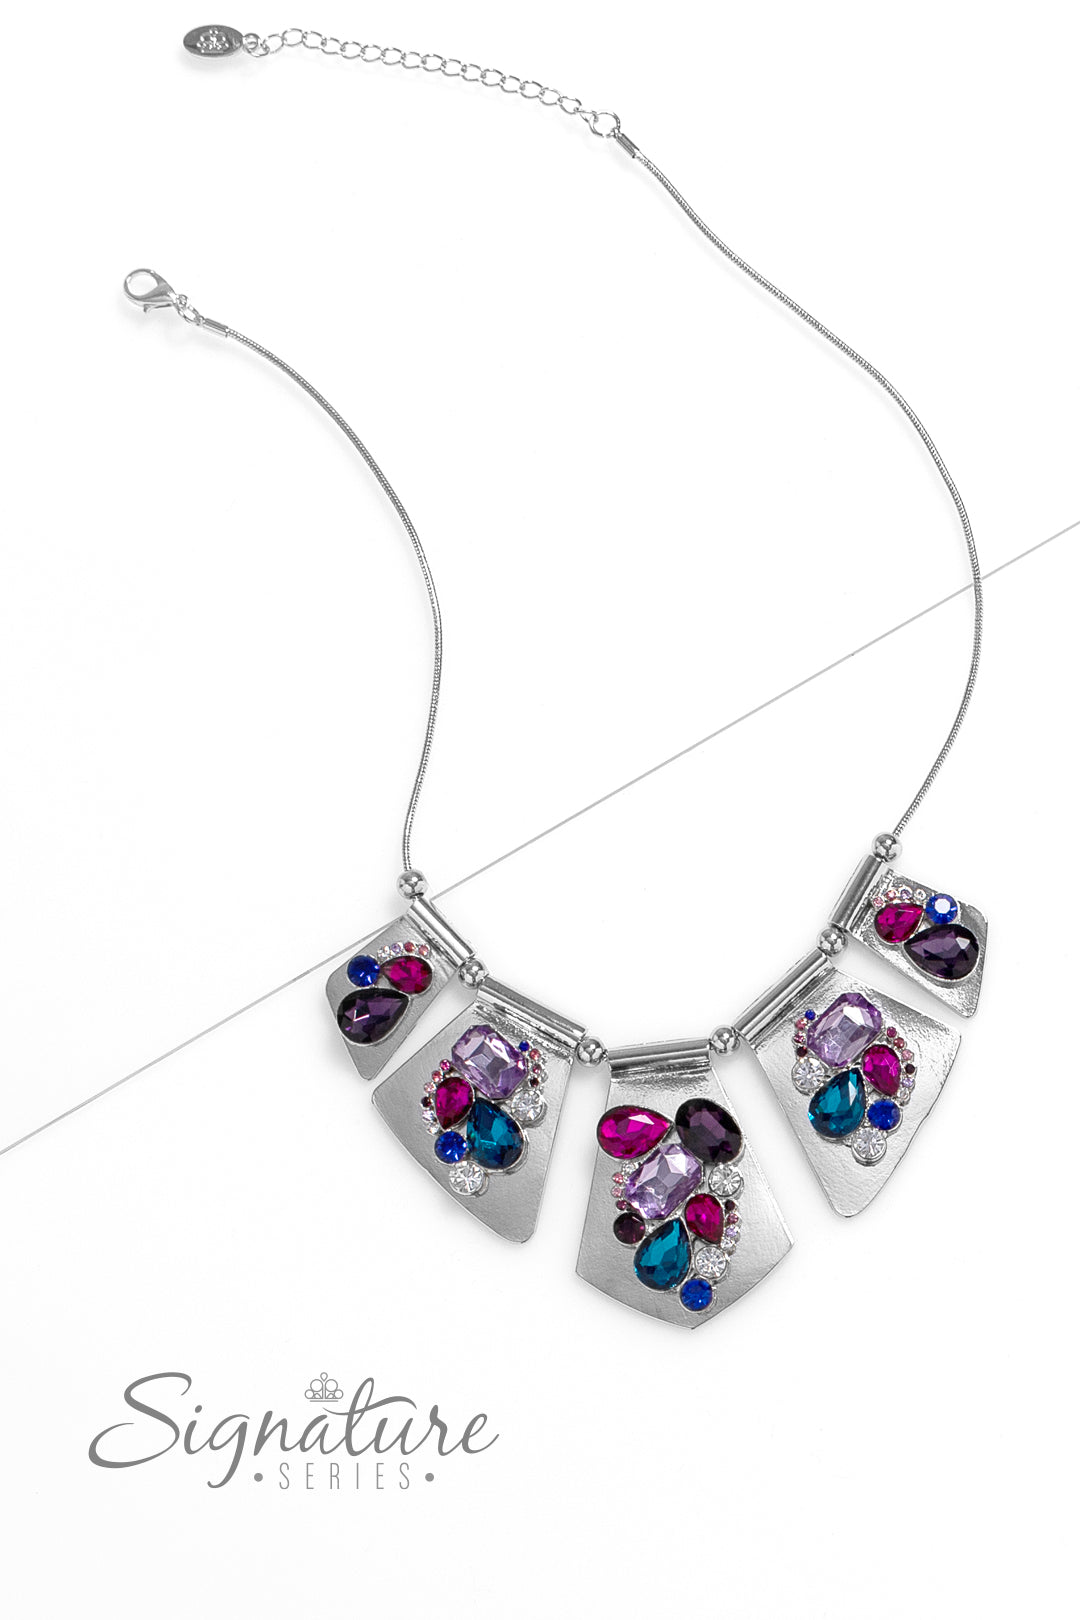 The Laura Zi Collection Necklace Papatazzi